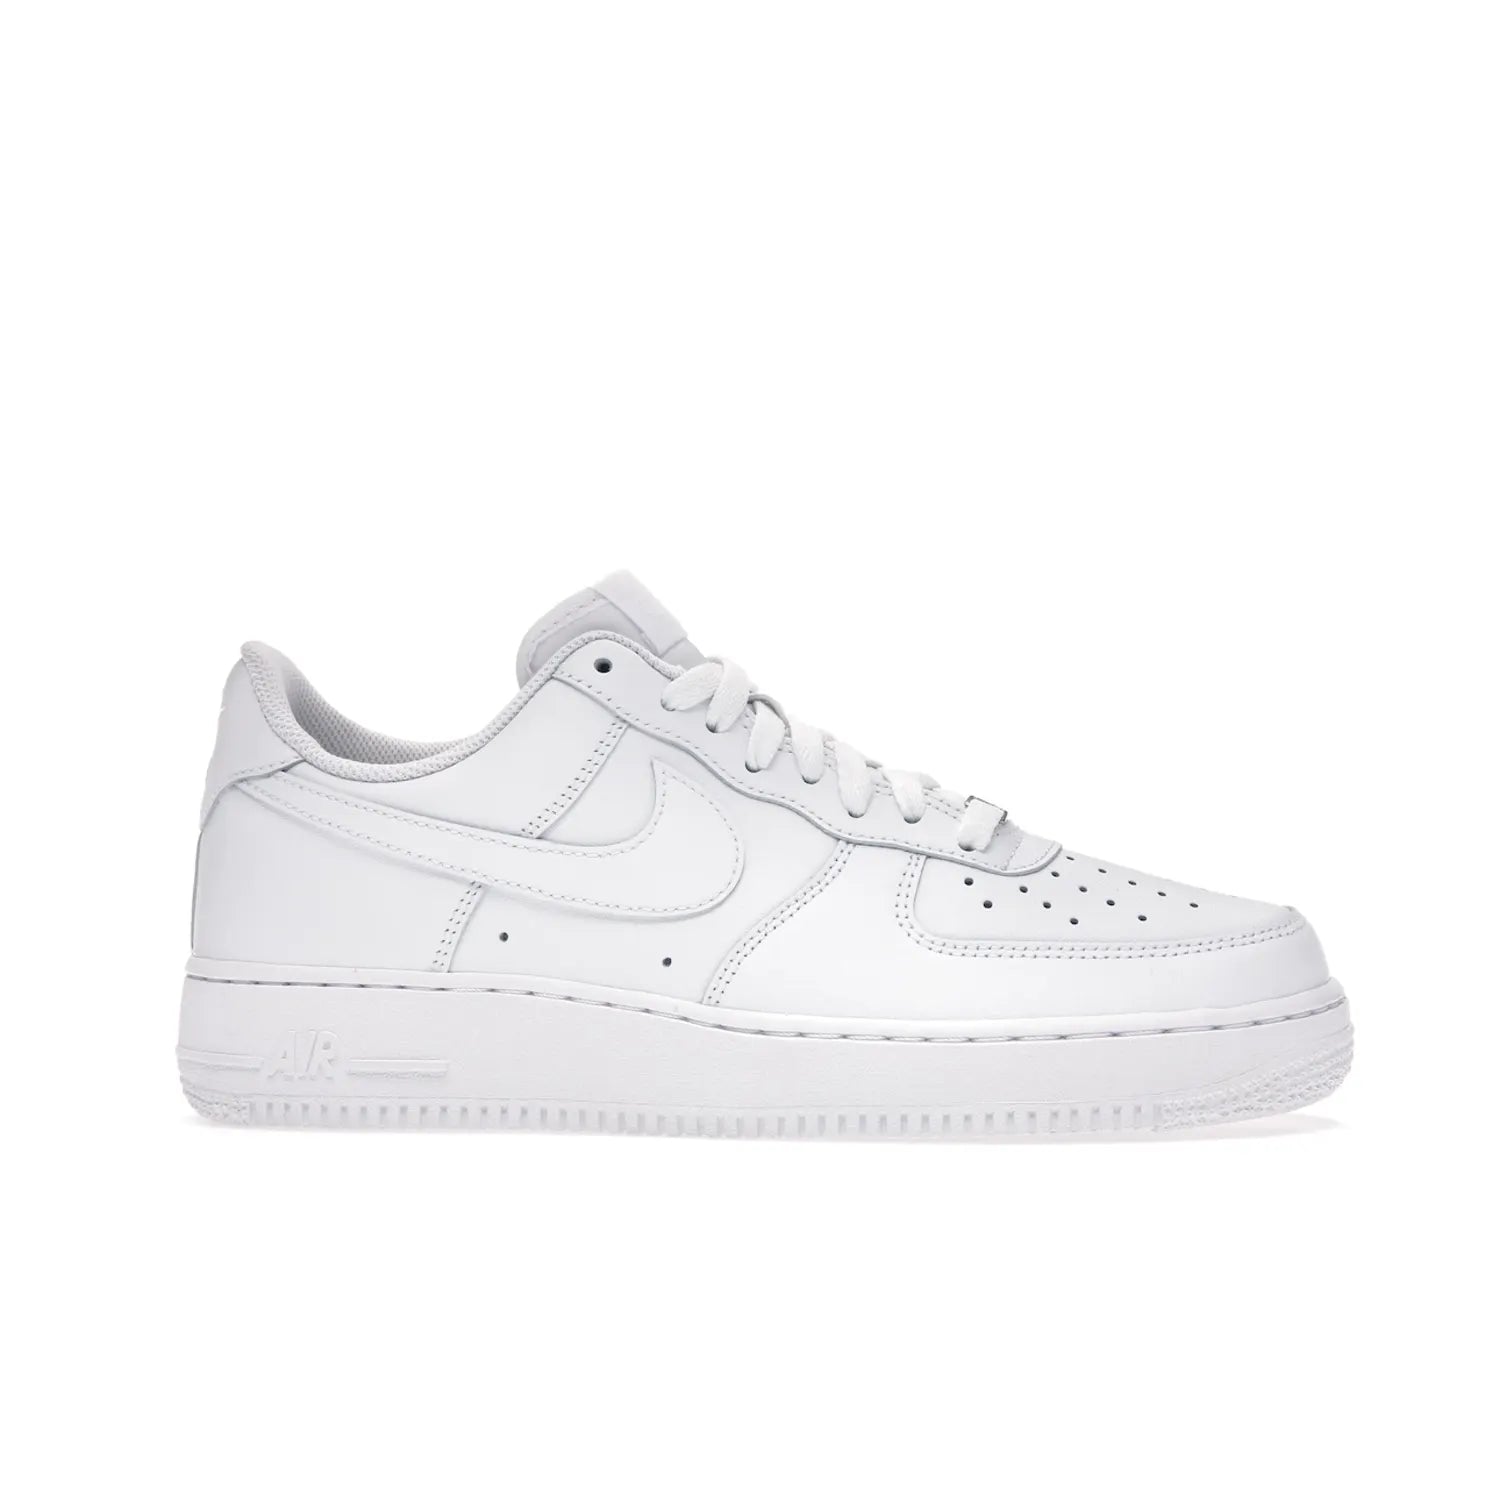 Nike Air Force 1 Low '07 White - Image 2 - Only at www.BallersClubKickz.com - ##
Iconic Swoosh overlays and crisp white sole make the classic Nike Air Force 1 Low White '07 an essential colorway. Classic for seasoned heads and new fans alike.